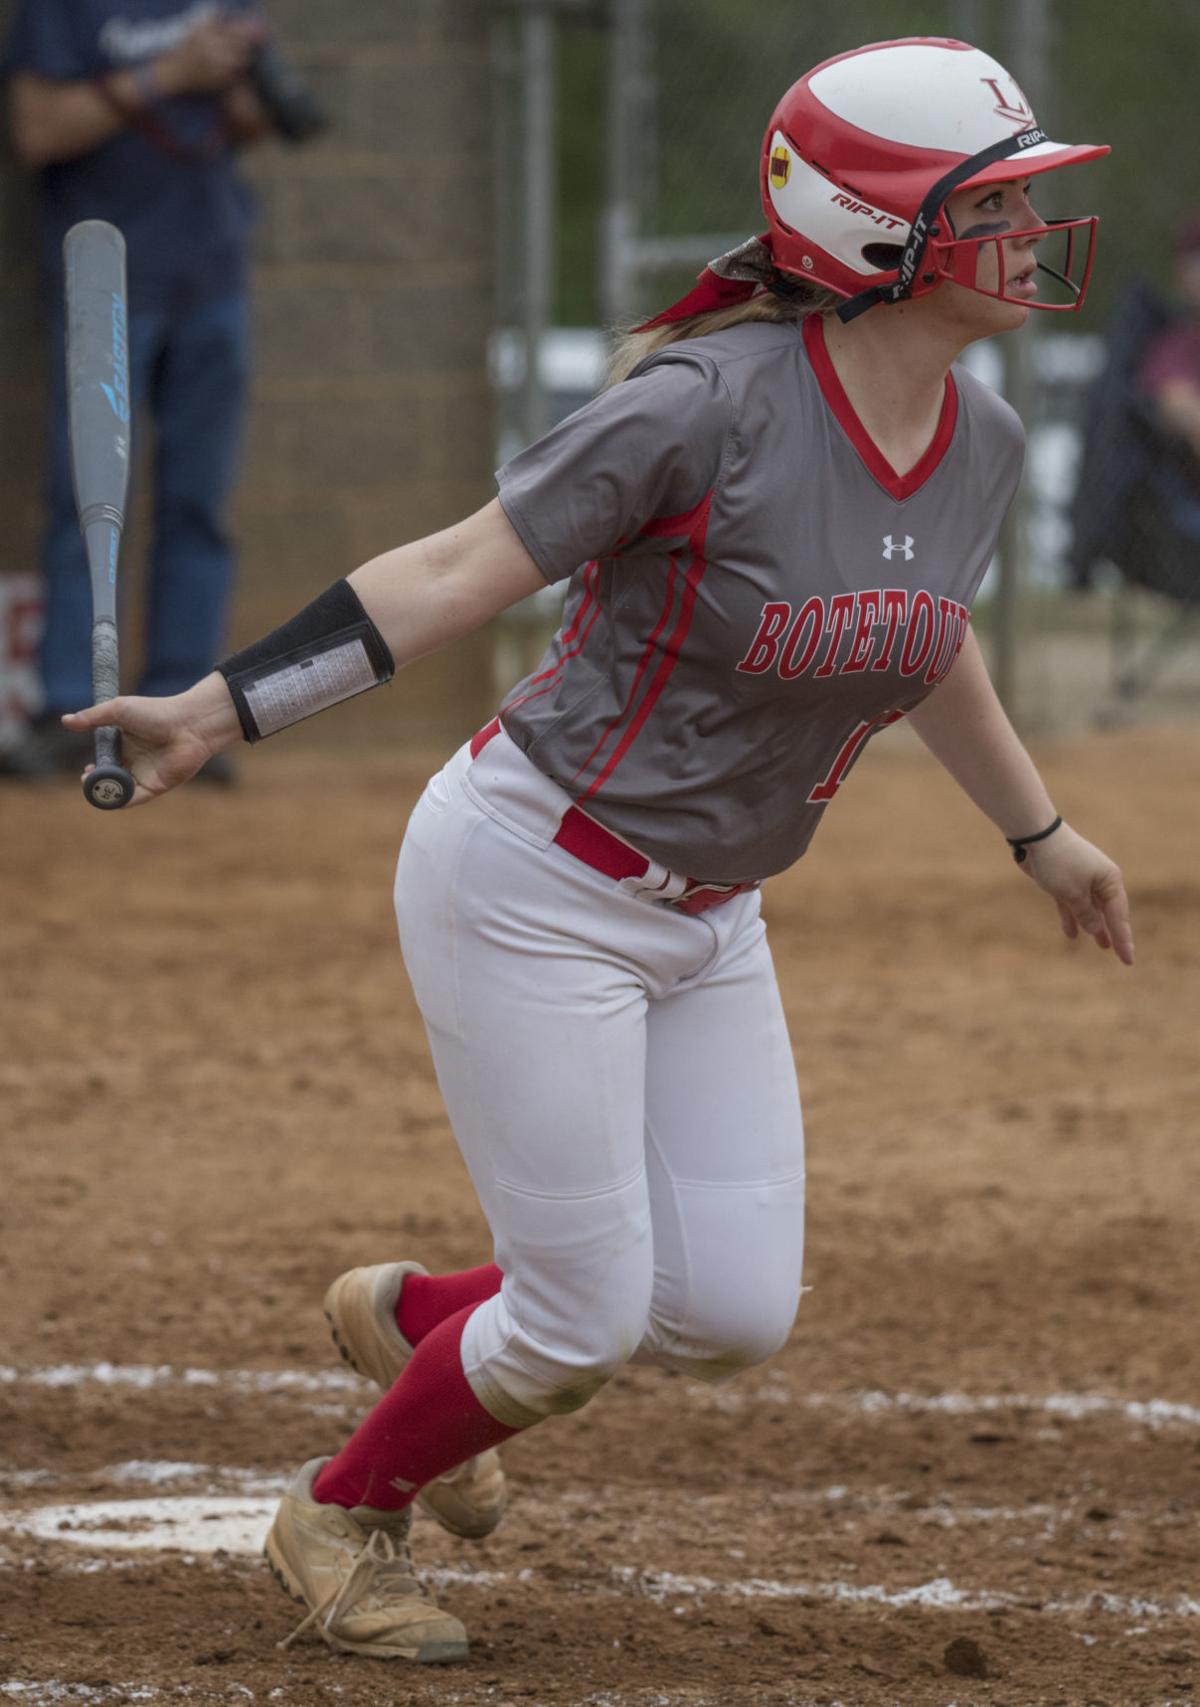 Lord Botetourt outfielder Hannah Mundy going from farm to Farmville